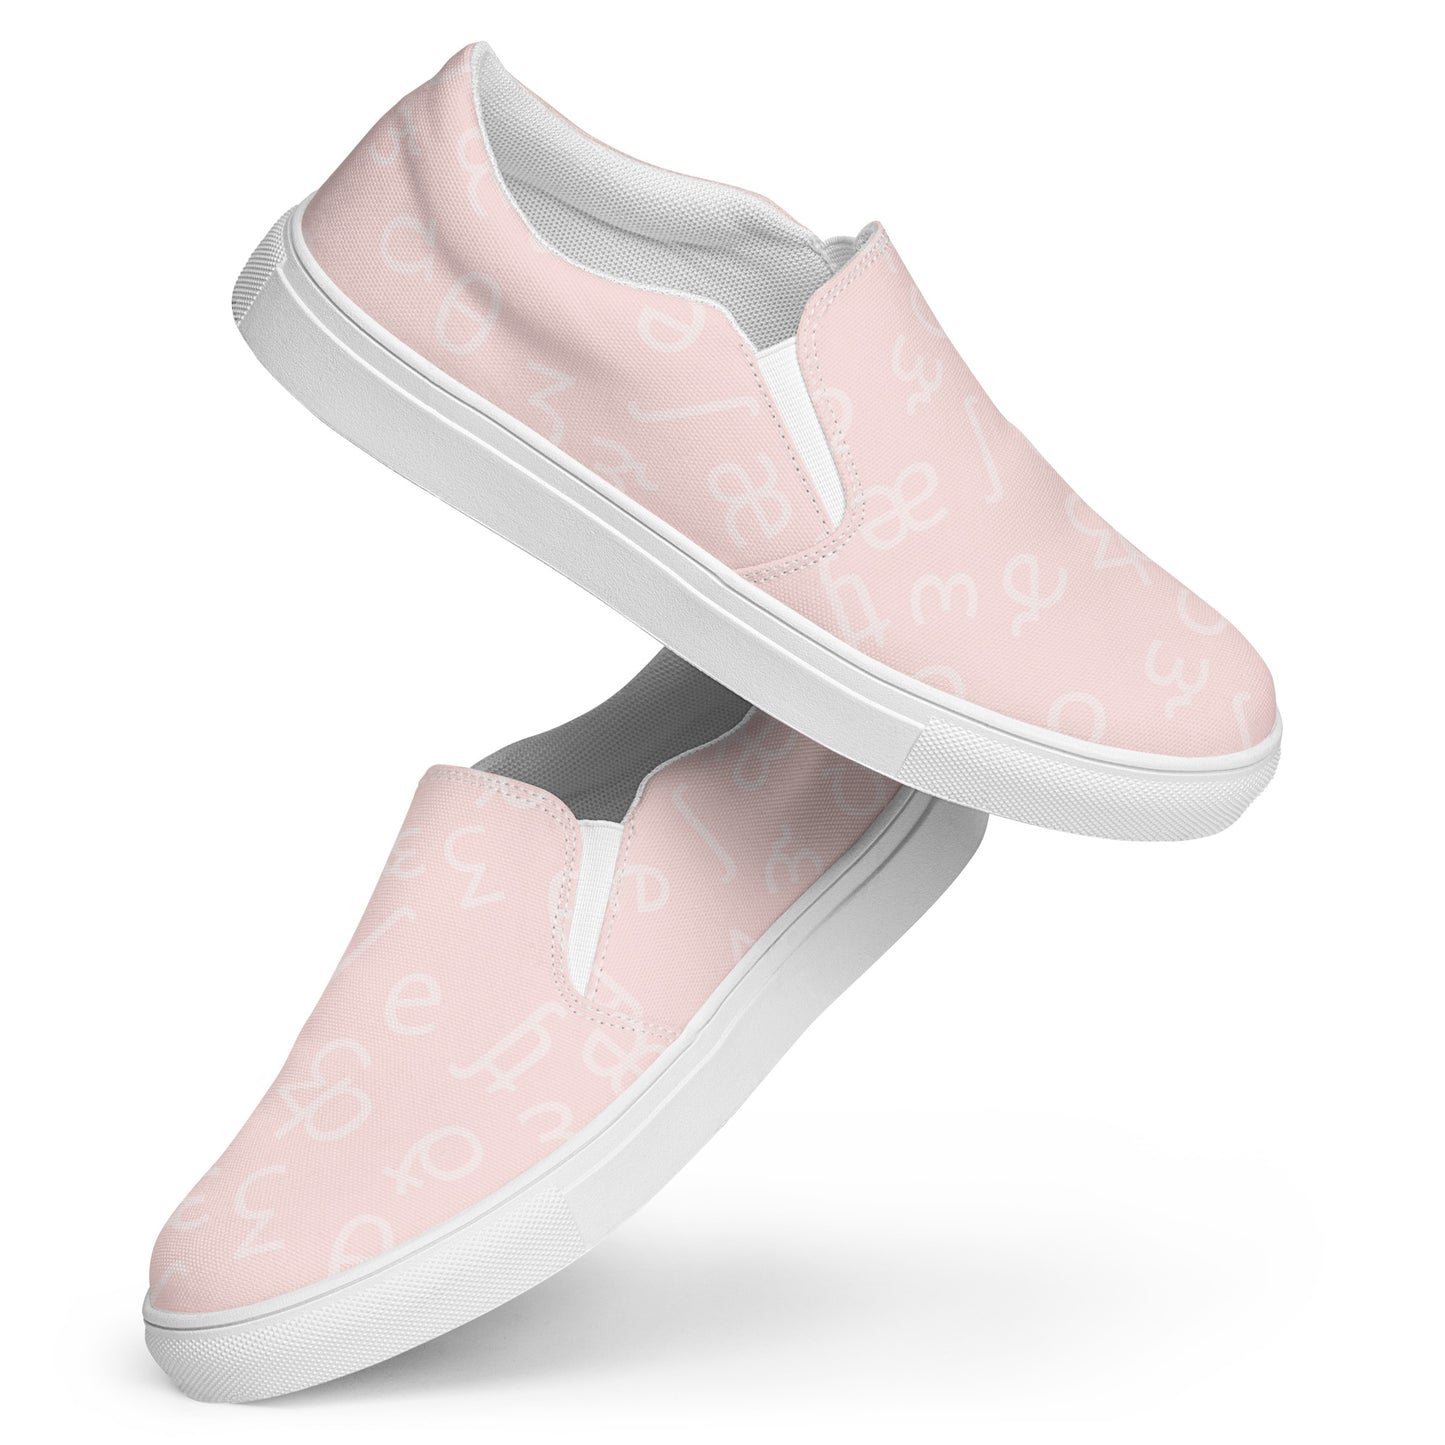 Pink IPA Slip-on Canvas Shoes (Women's Sizes)